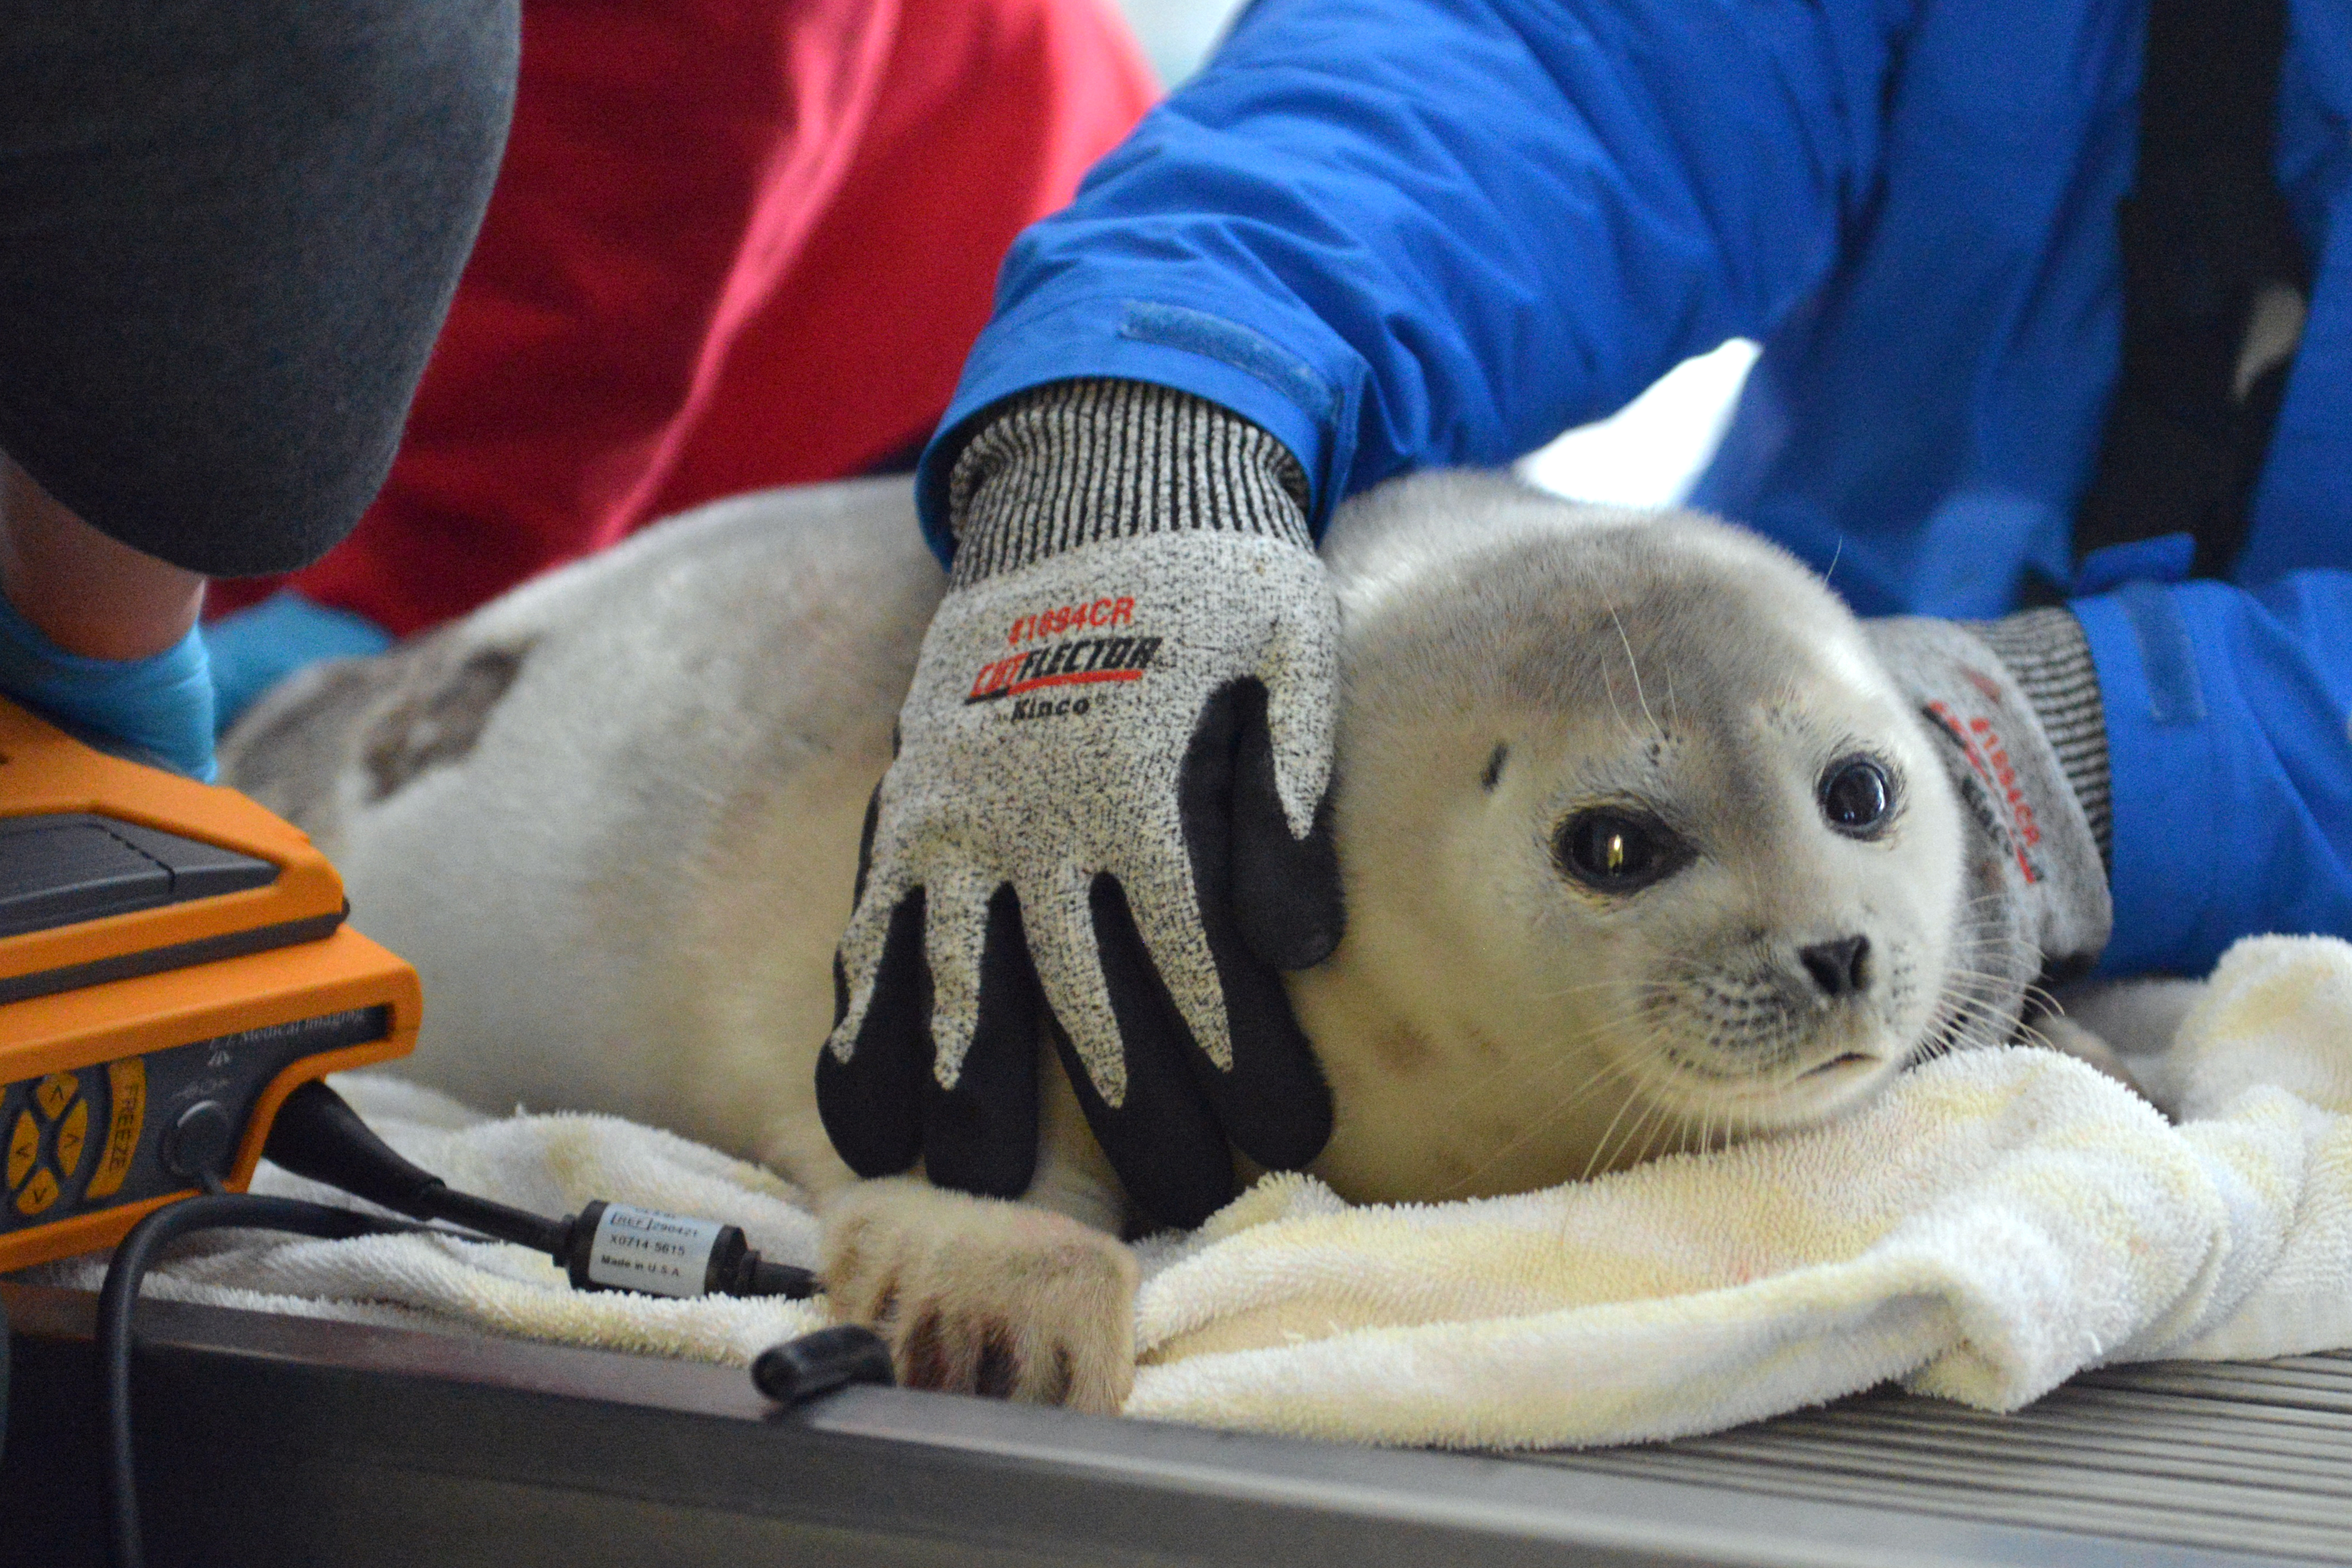 This yearling ringed seal rescued off Unalaska is the first stranded seal of 2017 admitted to the Alaska SeaLife Center for treatment. (Alaska SeaLife Center)